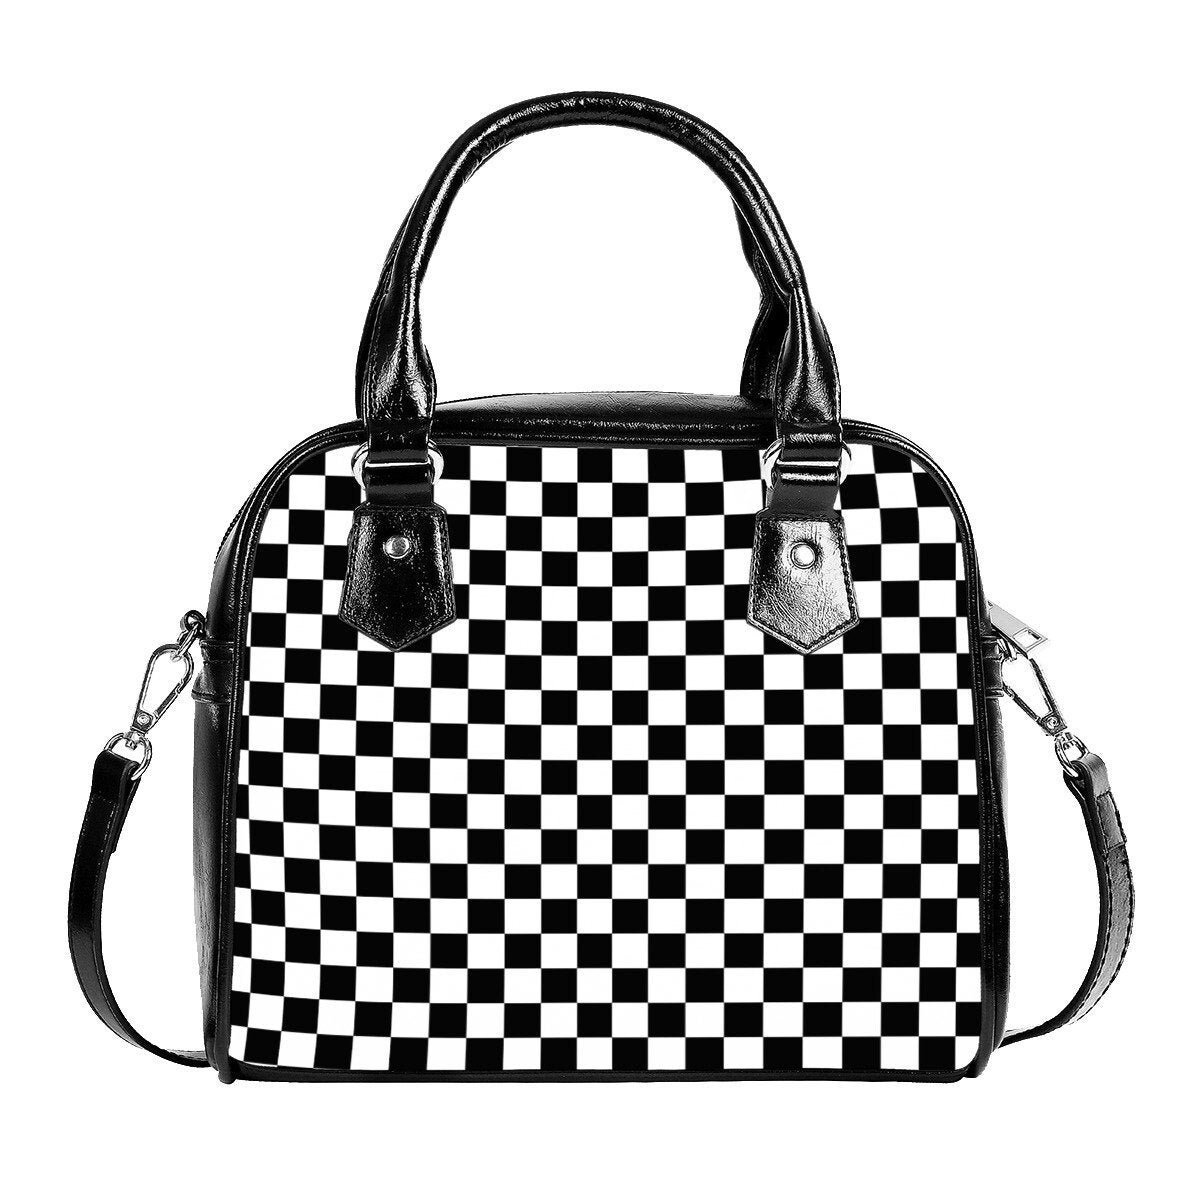 Buy Black & White Handbags for Women by FIONI by Payless Online | Ajio.com